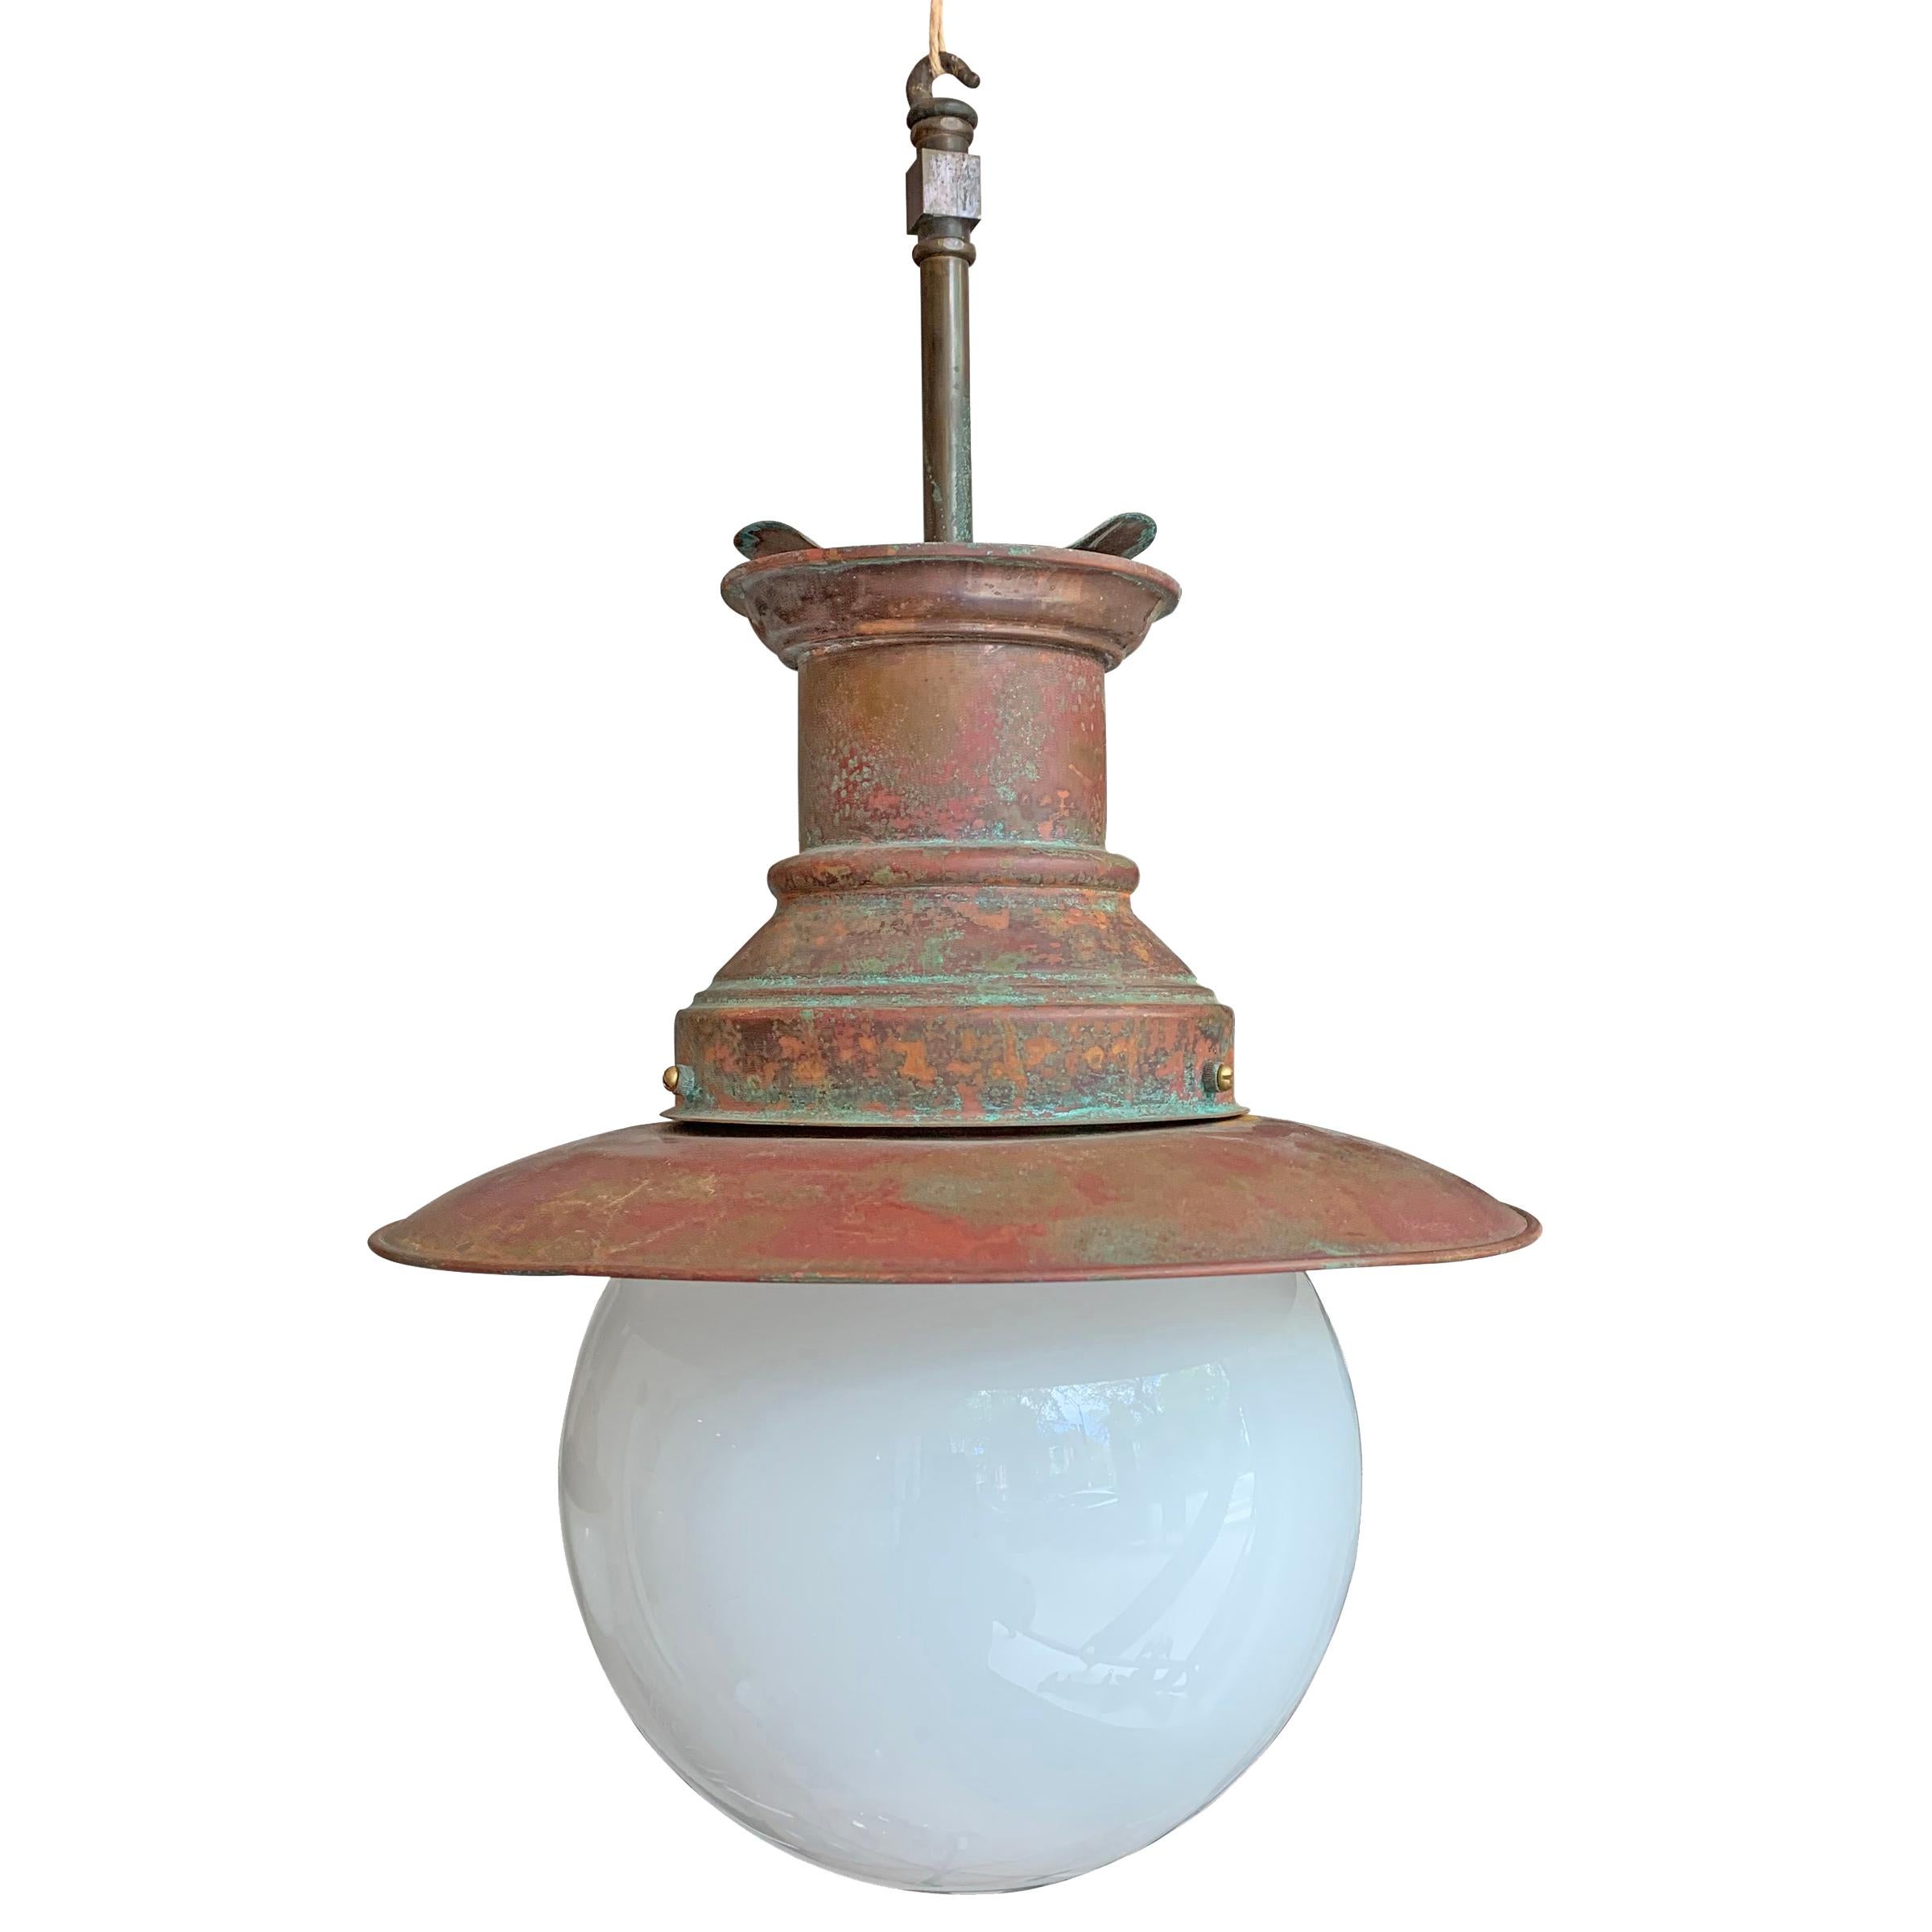 A fantastic set of three English copper pendant lights from a train station, with bronze rods for hanging. Not wired, but we can help with that if desired. Glass shades are newer replacements.